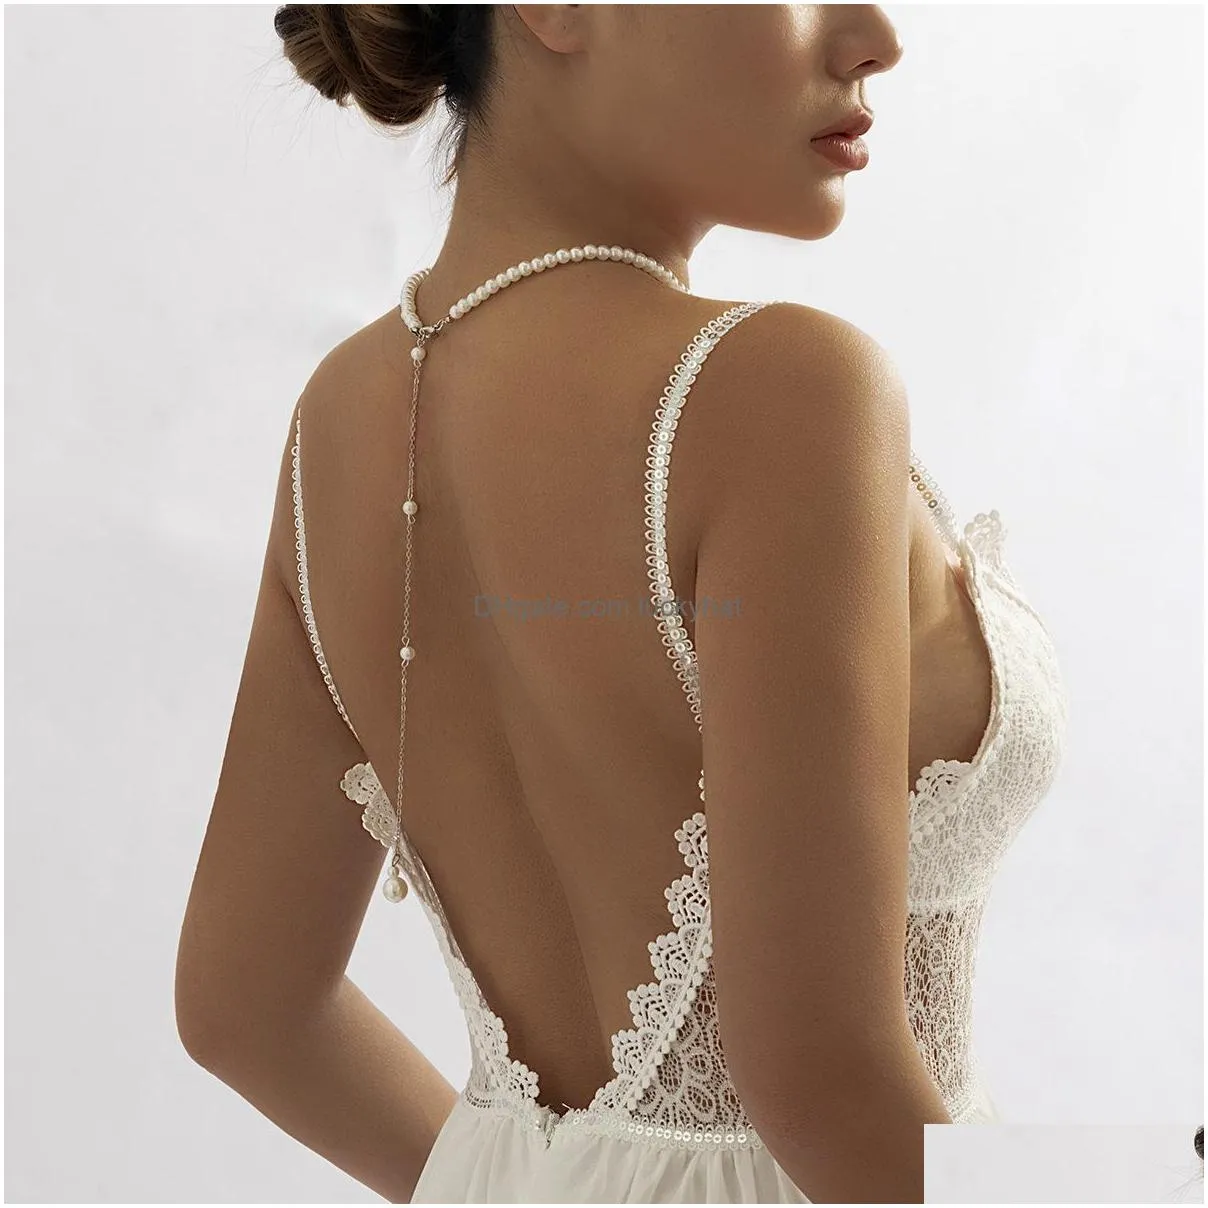 fashion jewelry beach bride back body chain ornaments choker necklace sexy faux pearls beaded chain tassel necklaces